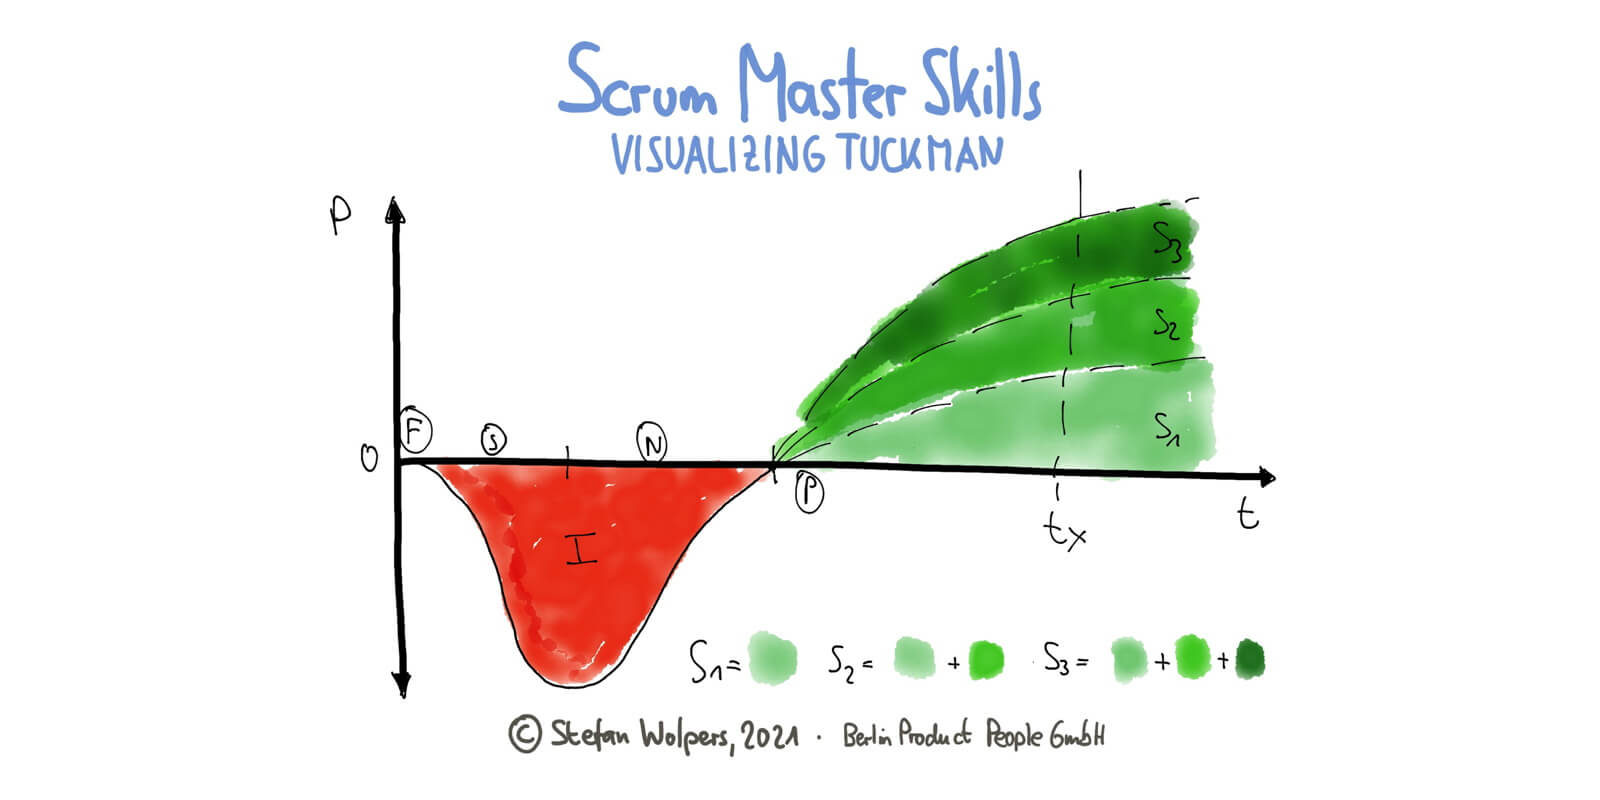 Scrum Master Skills: Visualizing the Cost of Team Building with the Tuckman Model — Berlin Product People GmbH